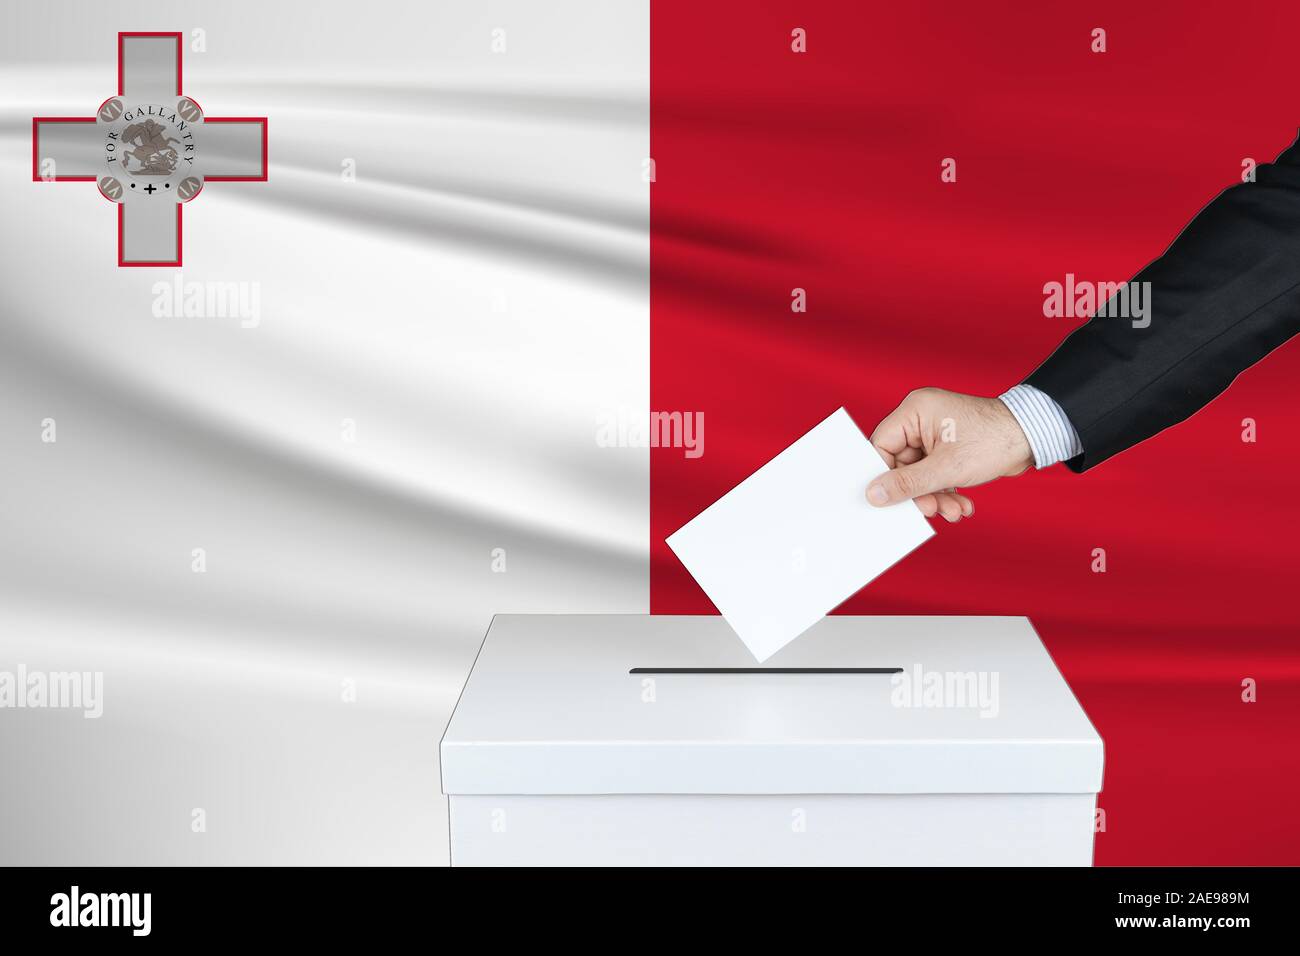 Election in Malta. The hand of man putting his vote in the ballot box. Waved Malta flag on background. Stock Photo